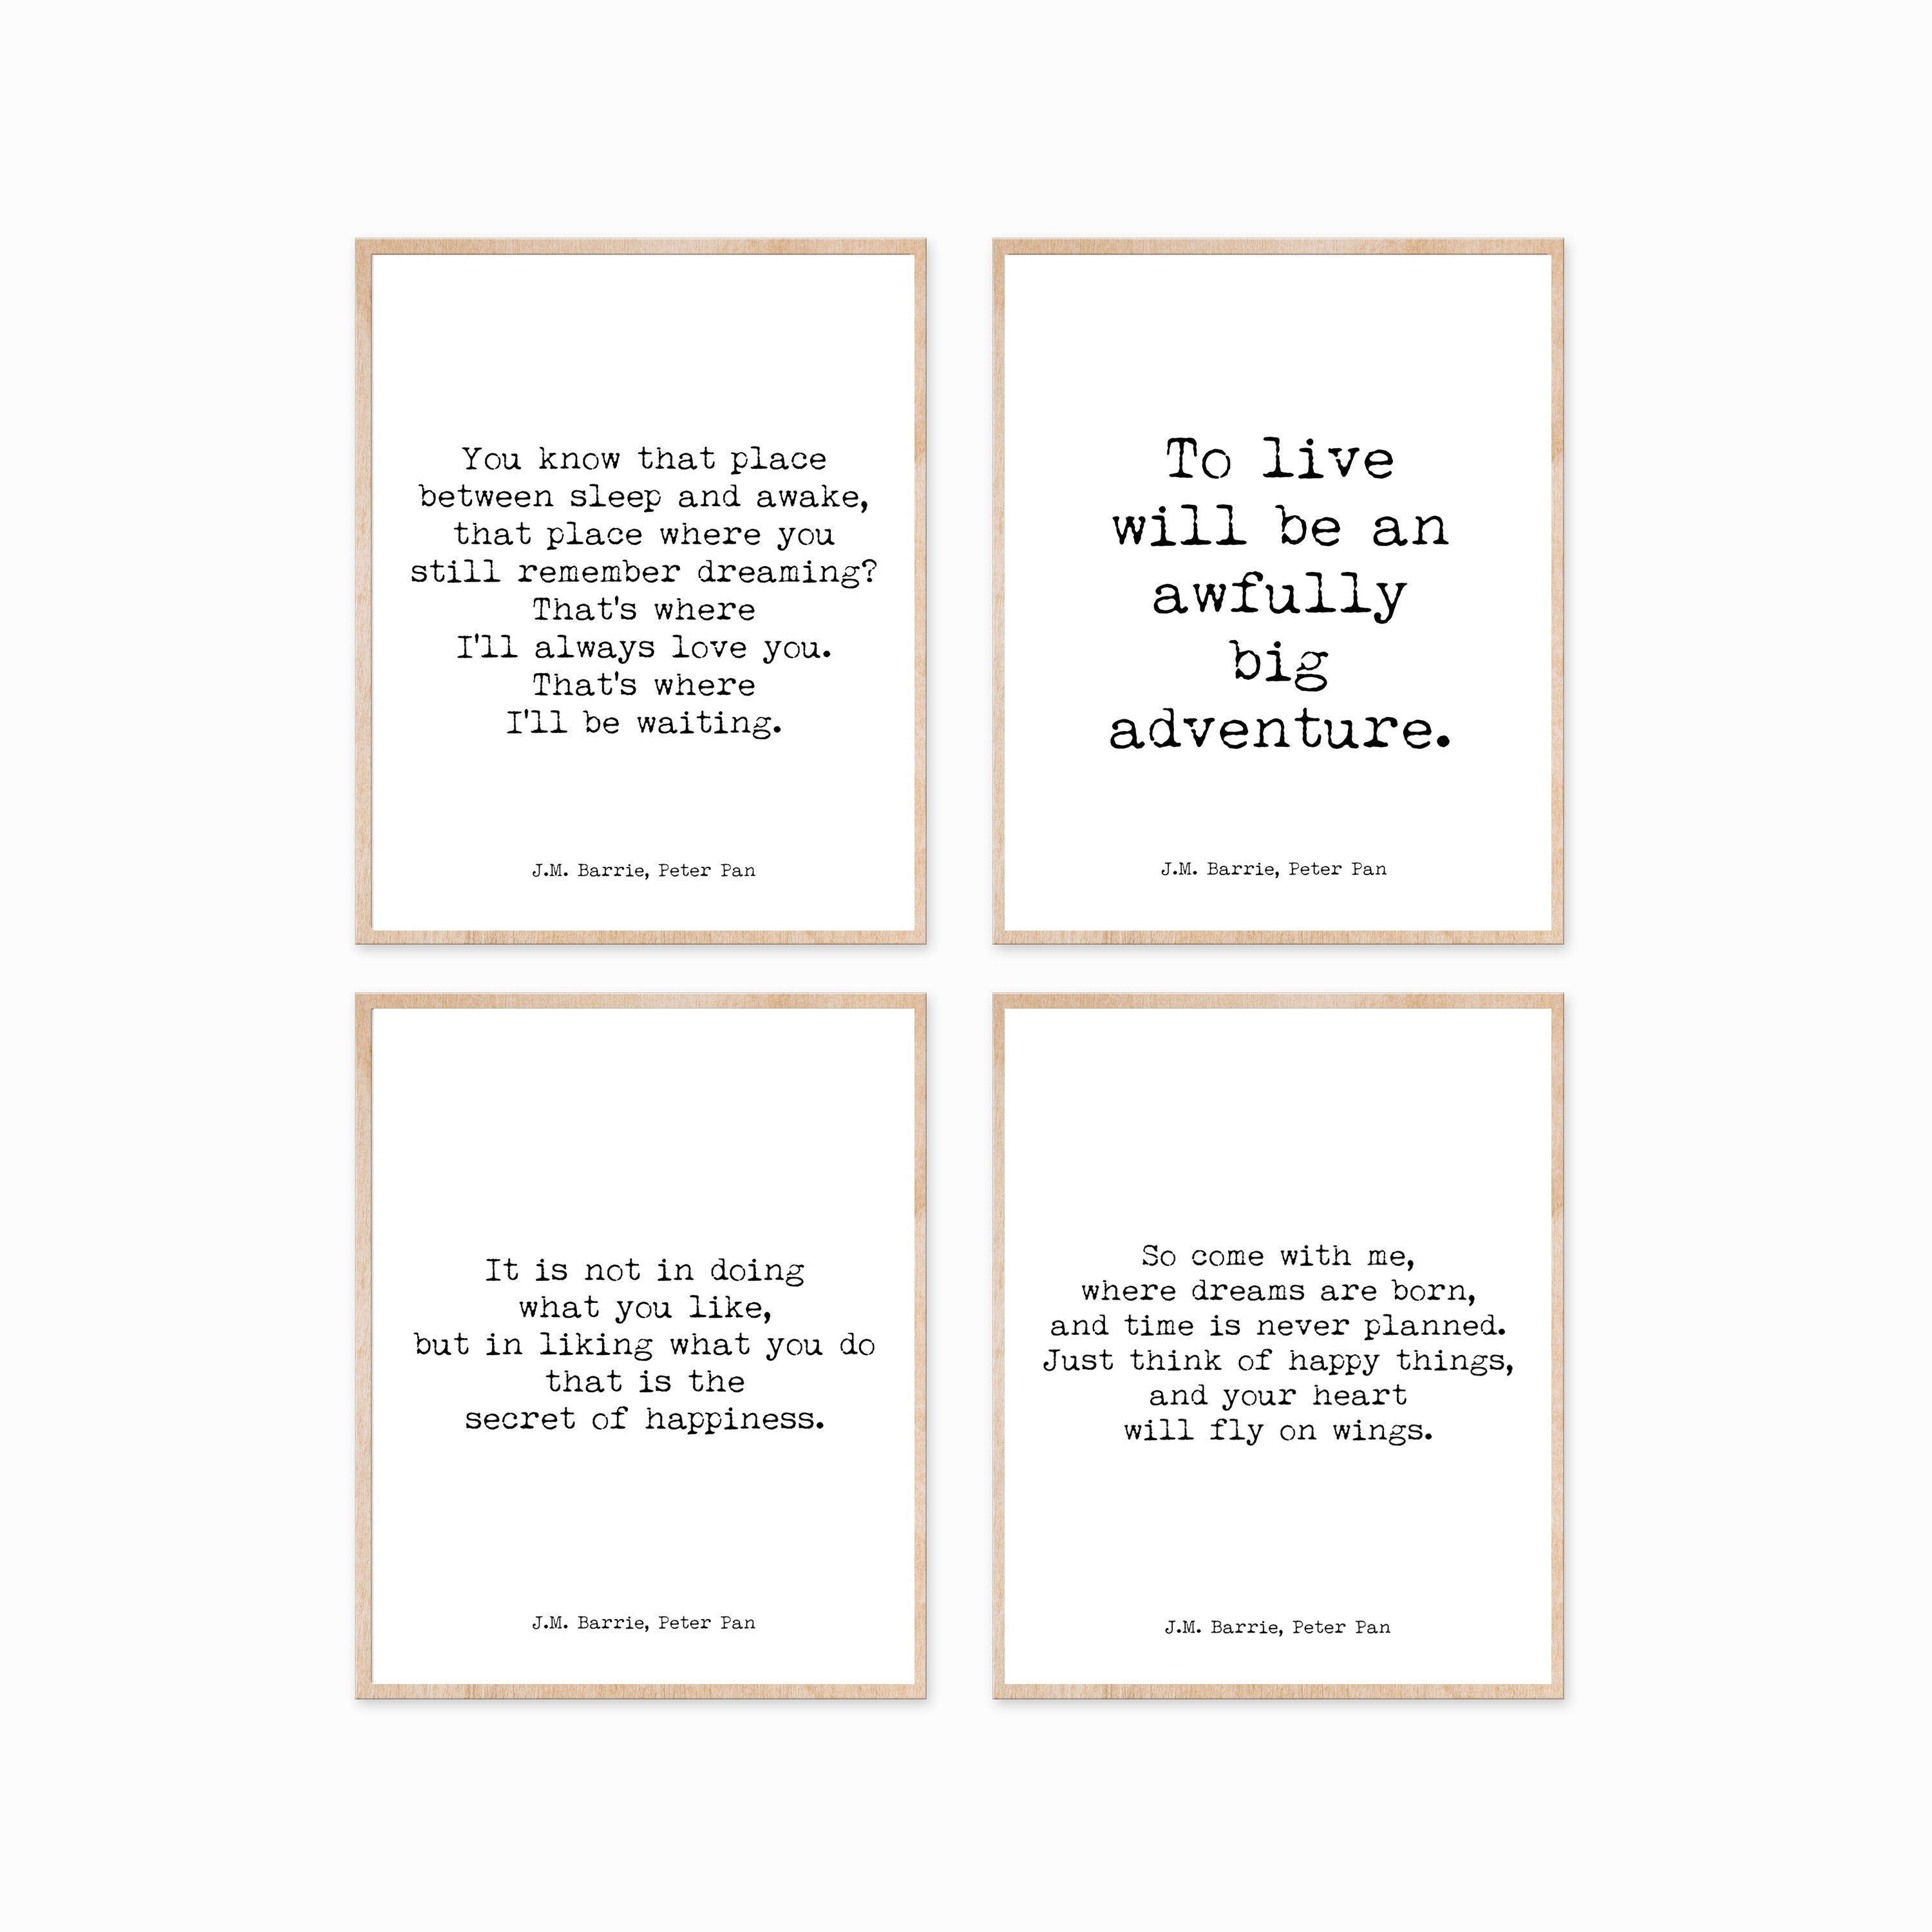 Peter Pan Quote Prints, Set of 4 Prints for Nursery or Playroom Decor in Black & White, Inspirational, Happiness, Unframed, Always Love you - BookQuoteDecor